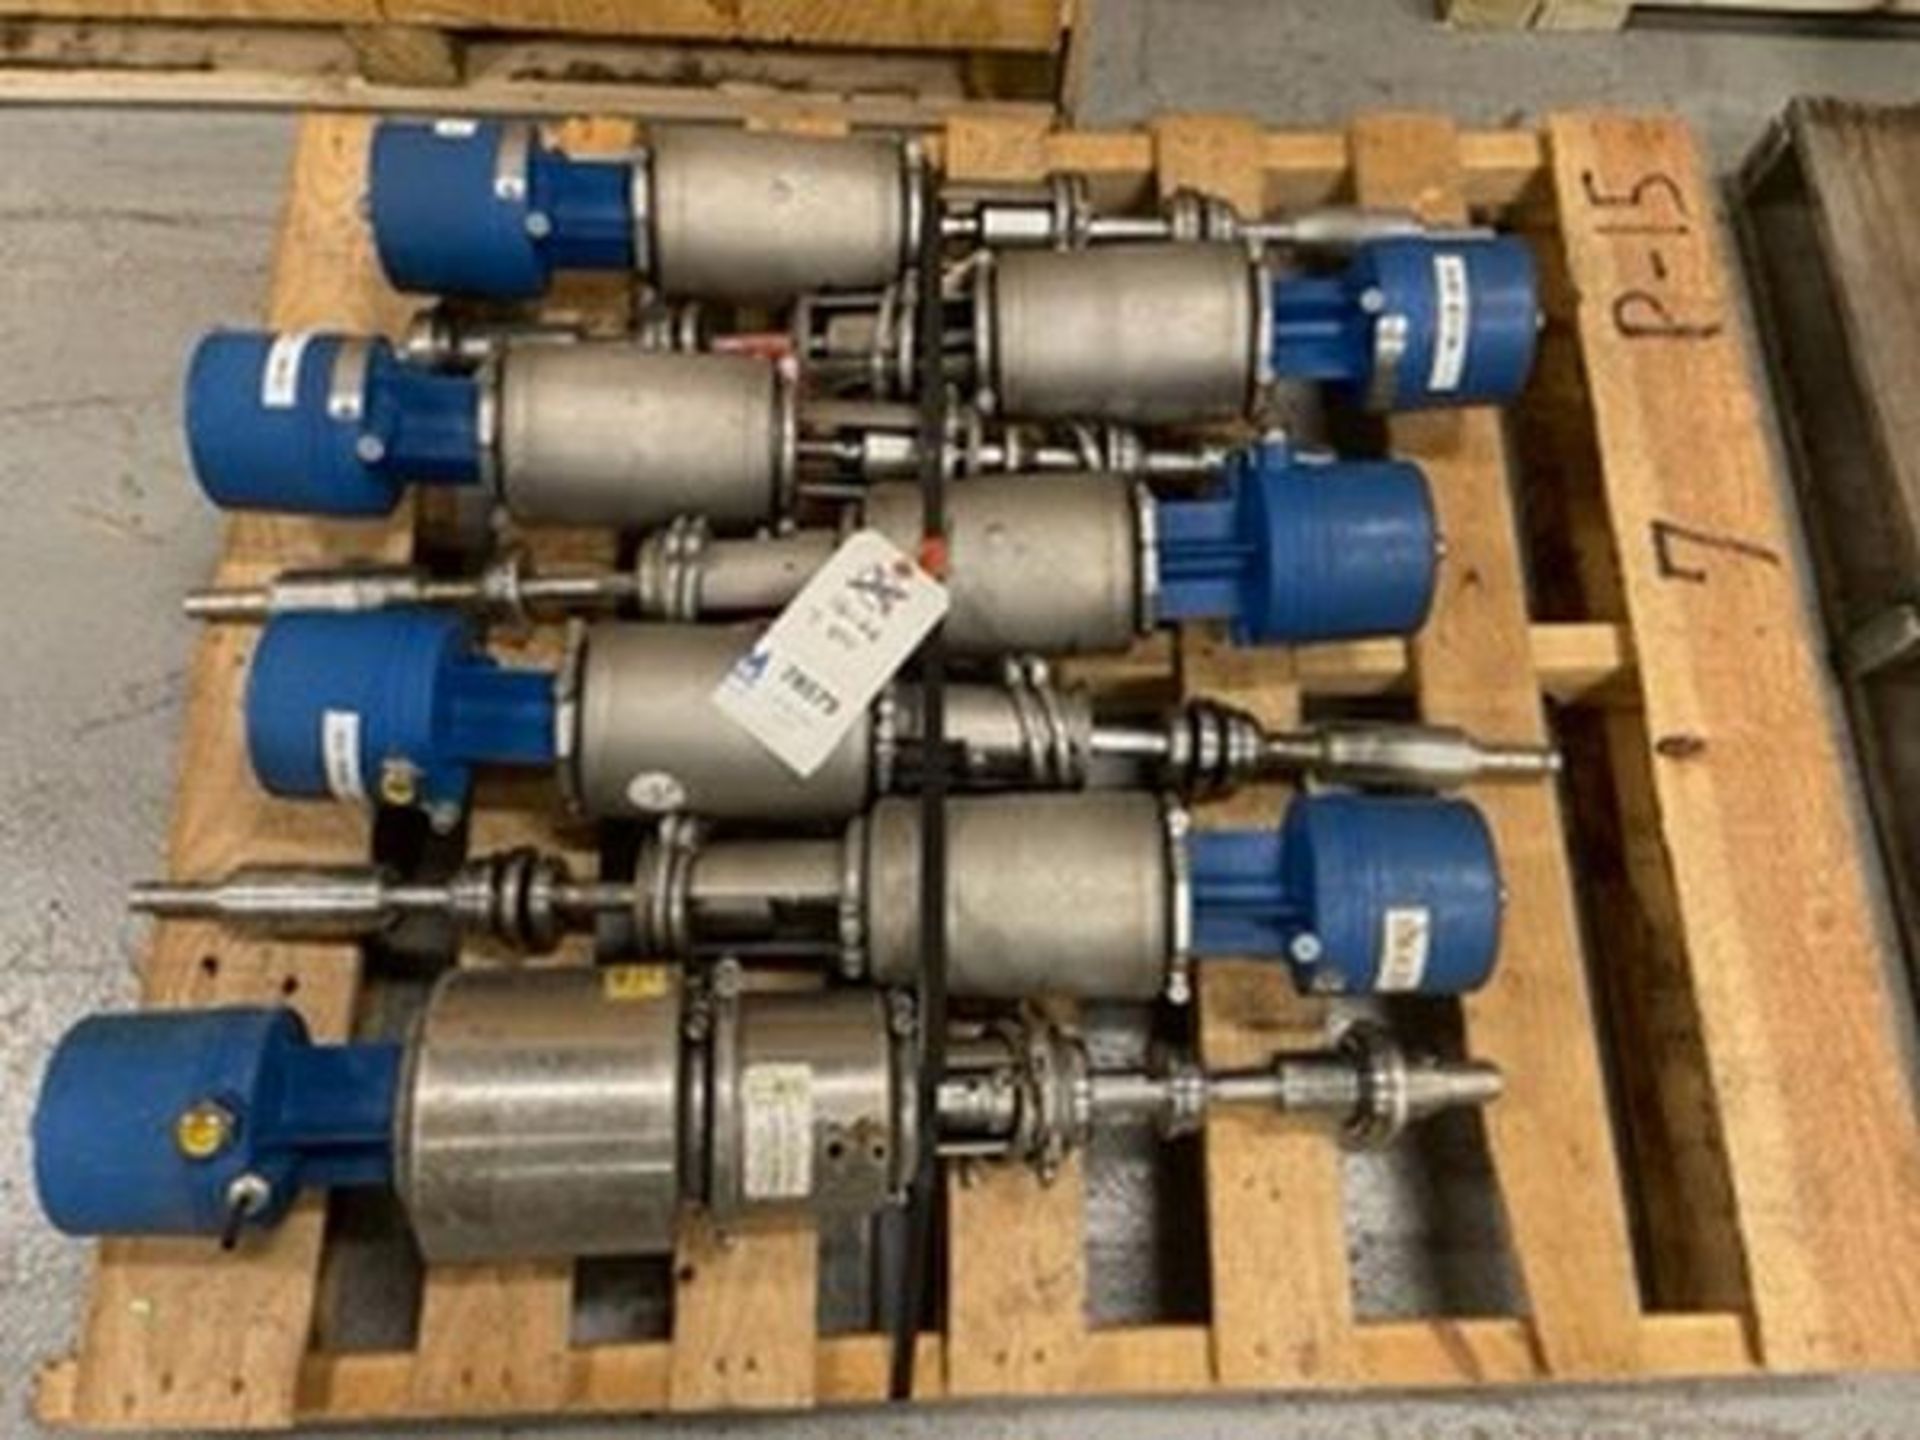 (4) GEA Aprox. 3" S/S Air Valves Actuators withThink Tops (NOTE: Bodies Not Included; Formerly